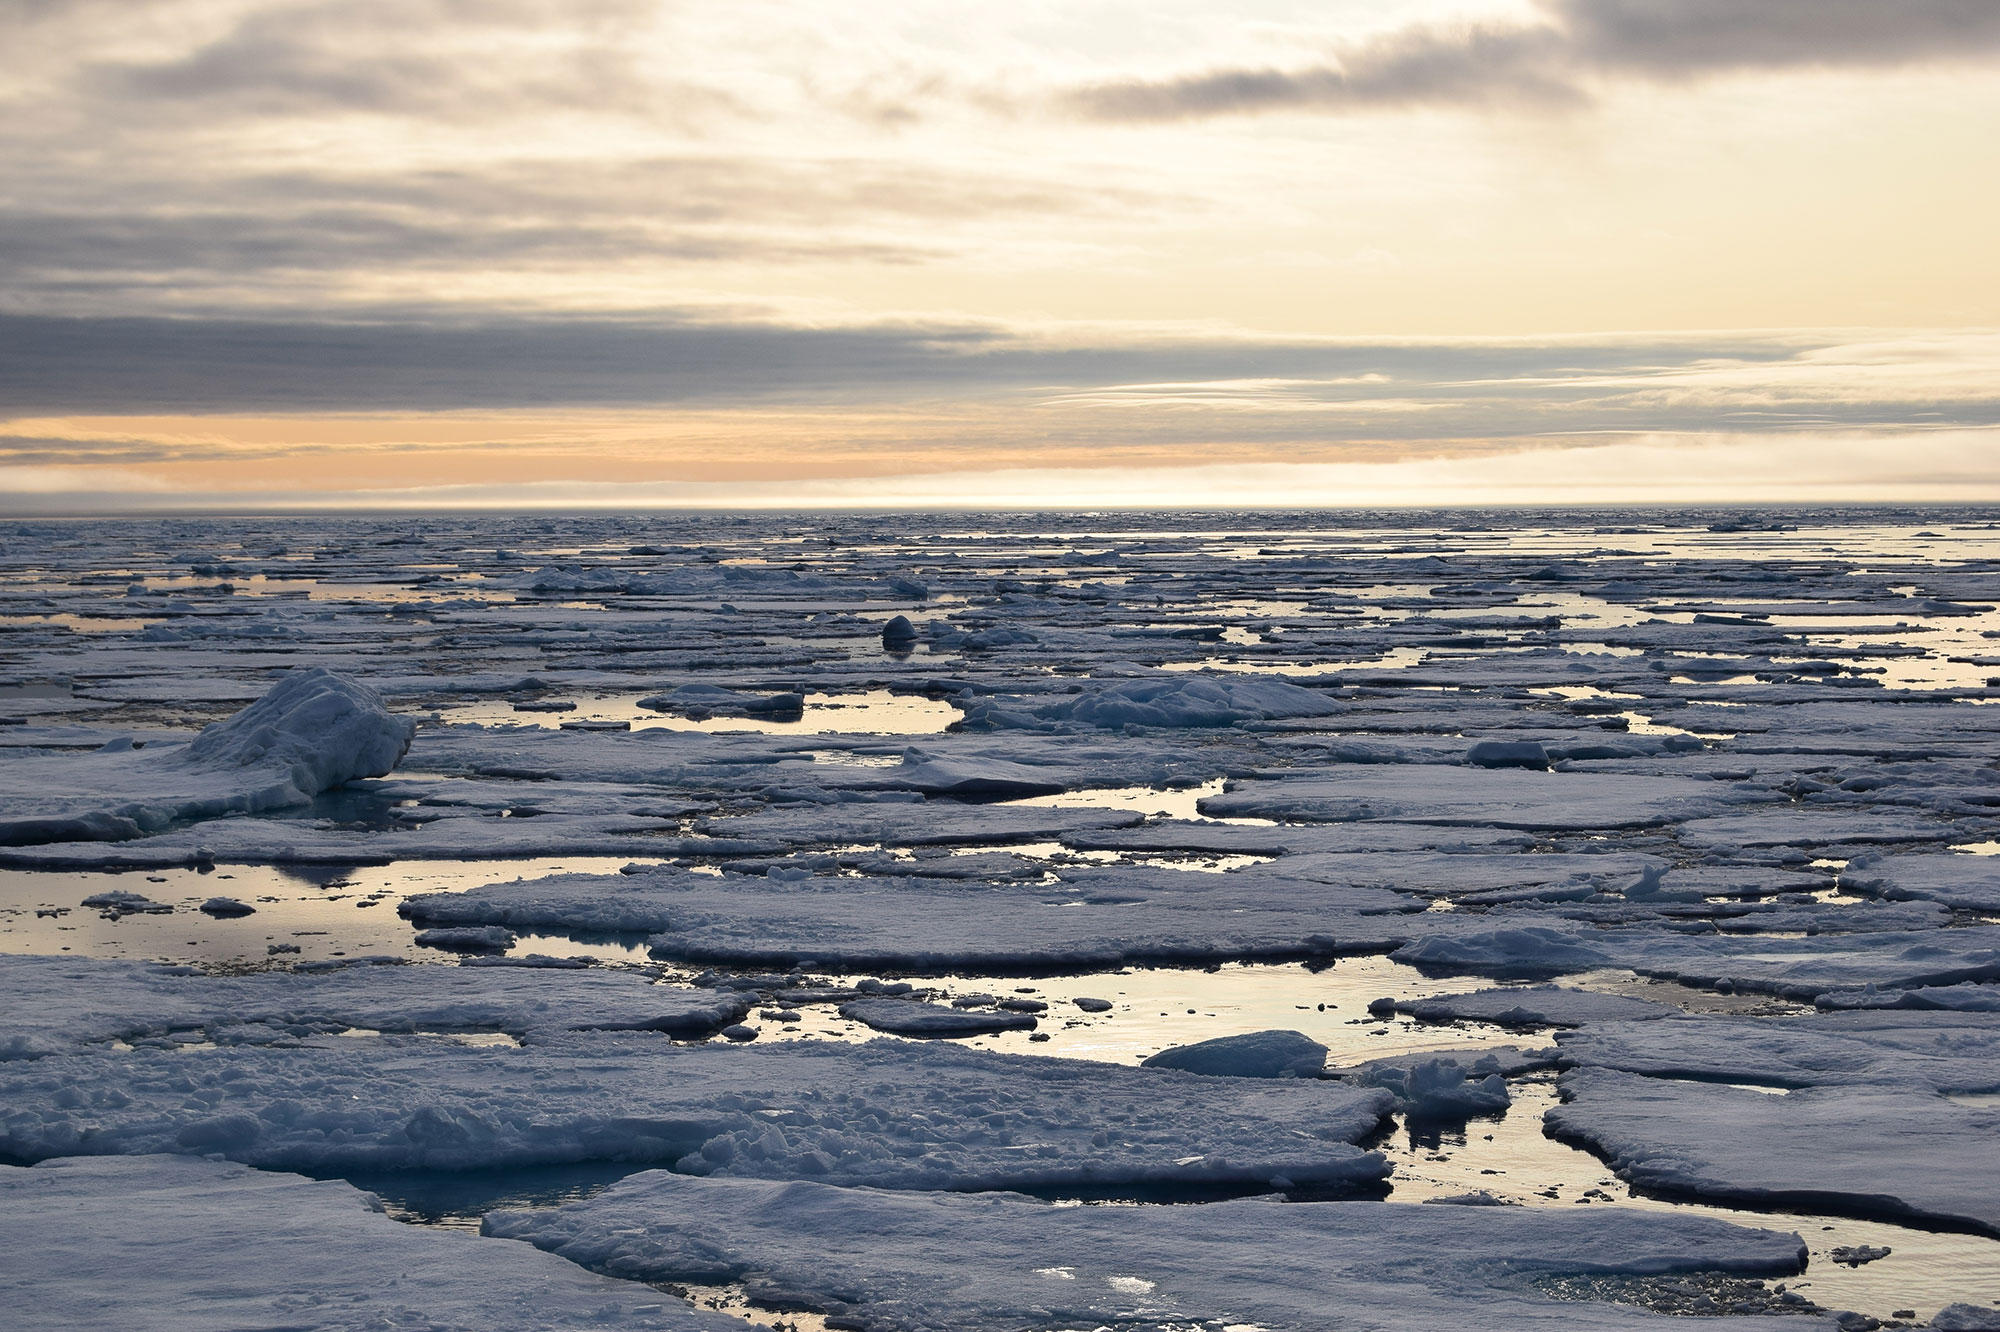 Sea ice at dusk in the Arctic